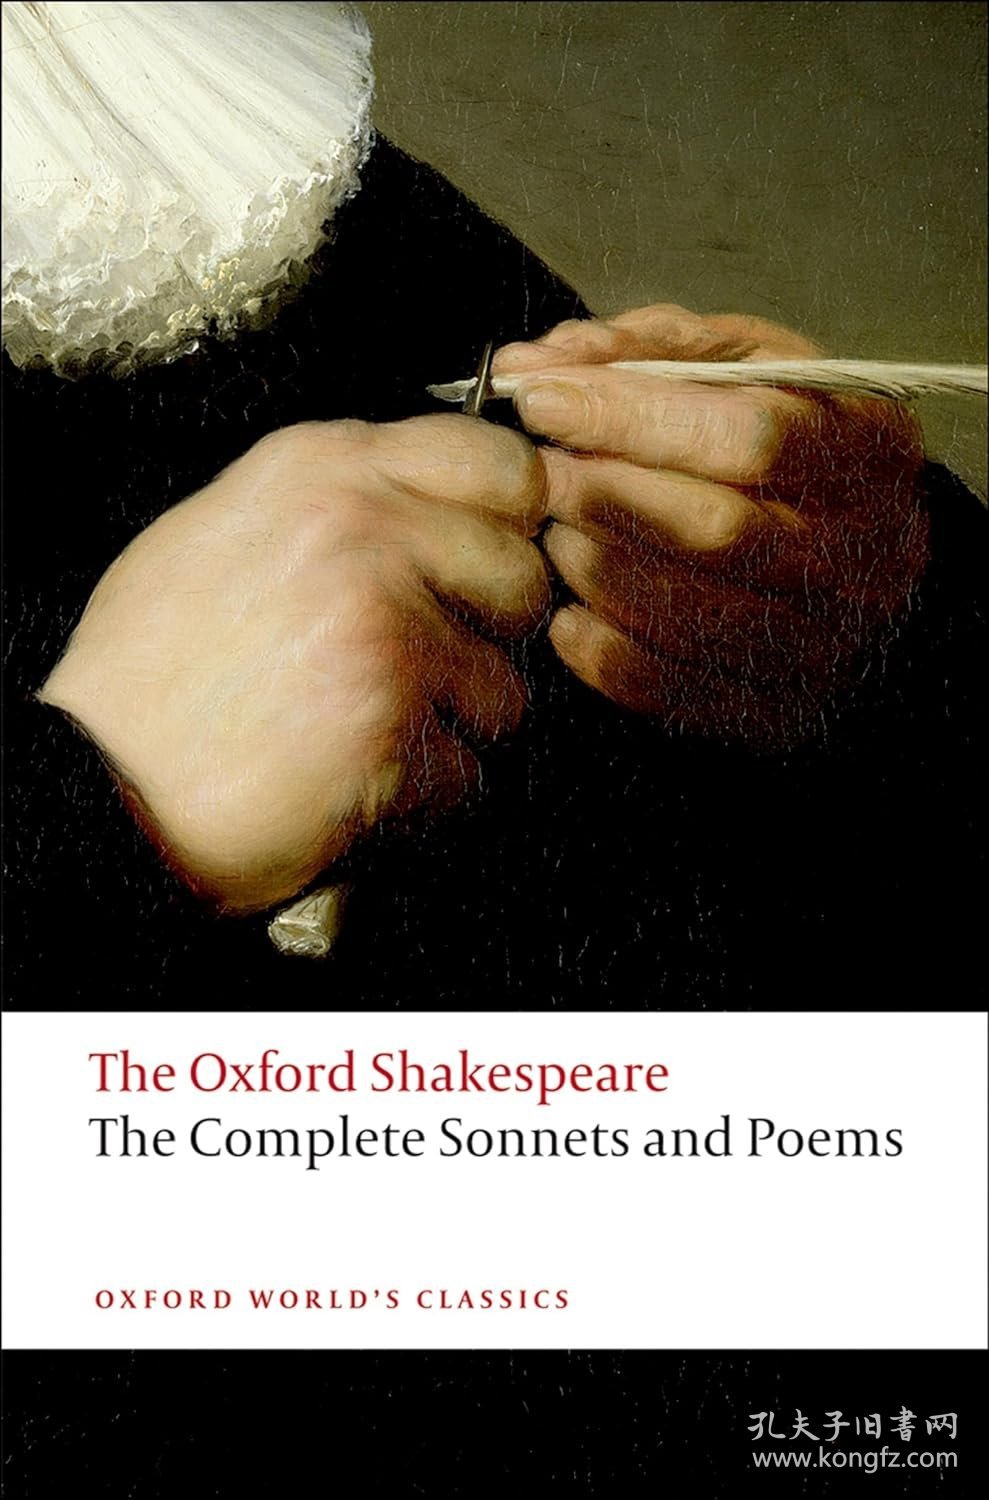 The Oxford Shakespeare: The Complete Sonnets and Poems，十四行诗和诗歌，莎士比亚作品，英文原版